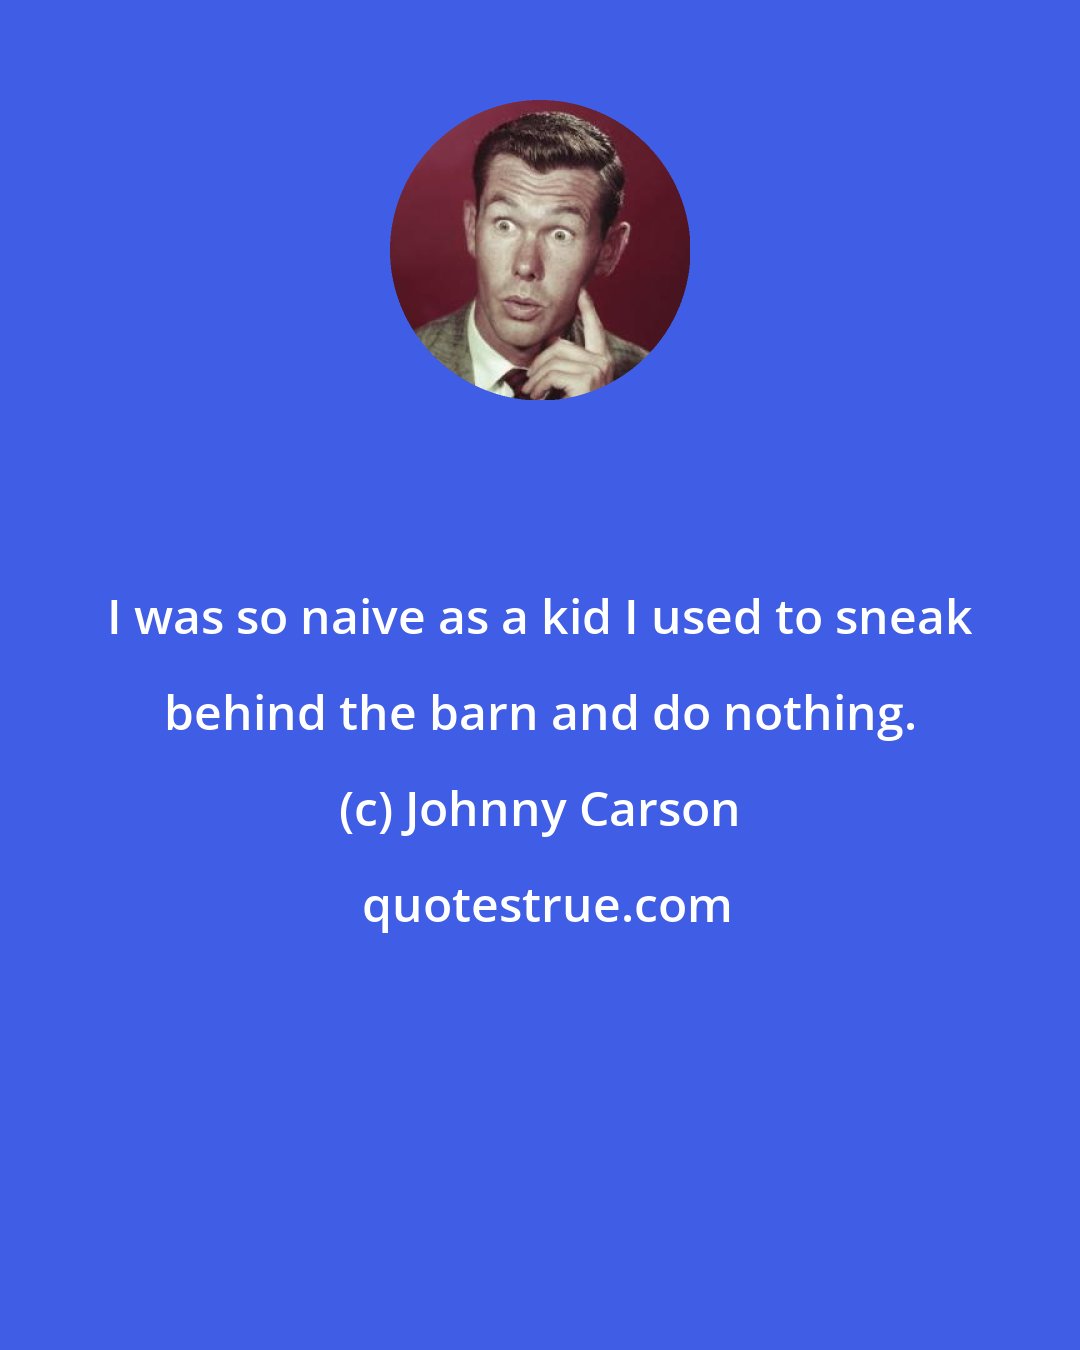 Johnny Carson: I was so naive as a kid I used to sneak behind the barn and do nothing.